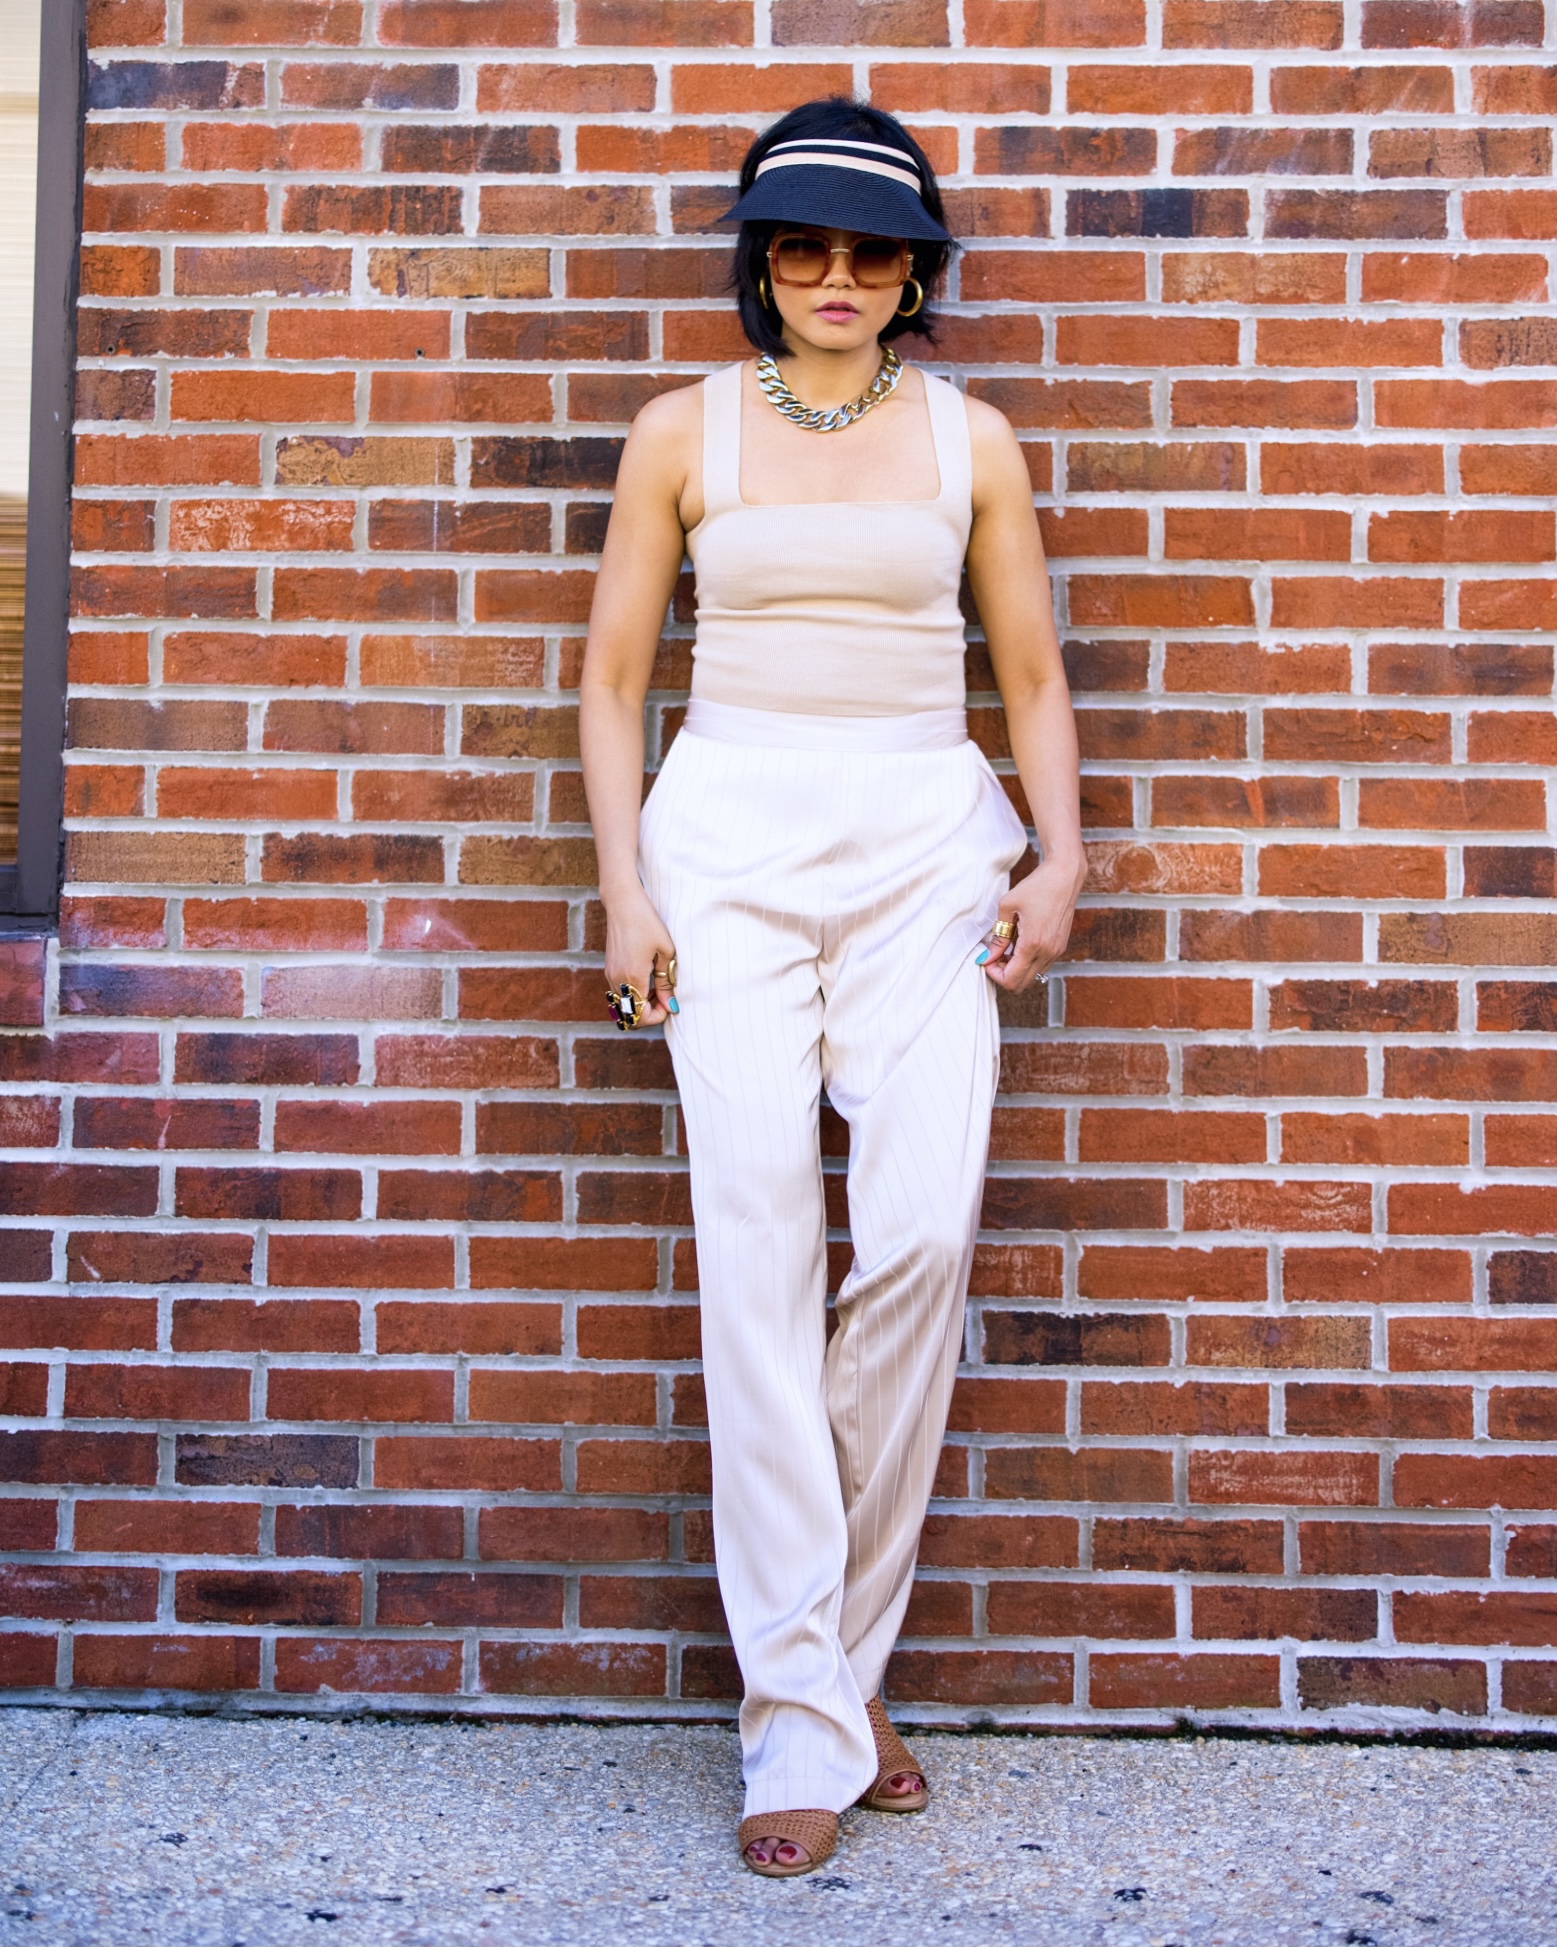 nanphanita jacob is styling neutral look with trending black visor hat by san diego hat company